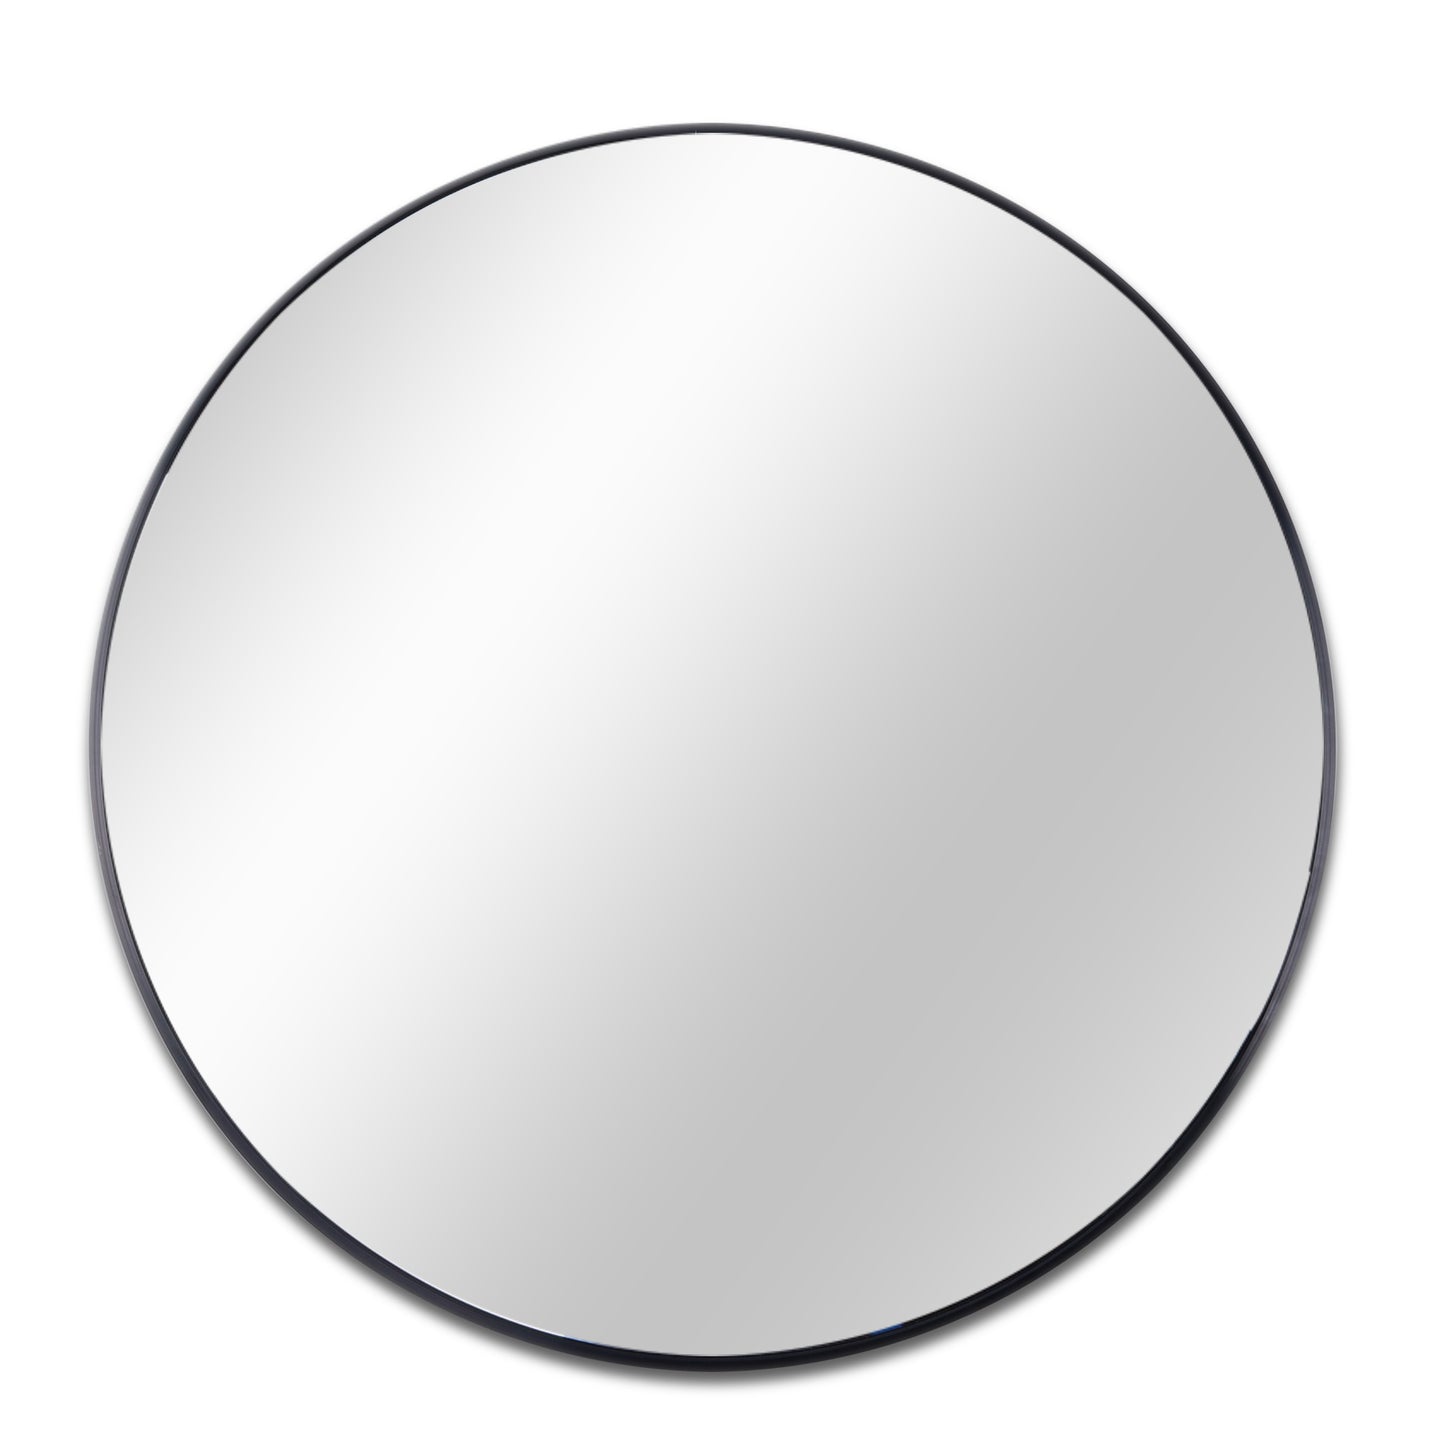 Round Mirror, Circle Mirror 30 Inch, Black Round Wall Mirror Suitable for Bedroom, Living Room, Bathroom, Entryway Wall Decor and More, Brushed Aluminum Frame Large Circle Mirrors for Wall